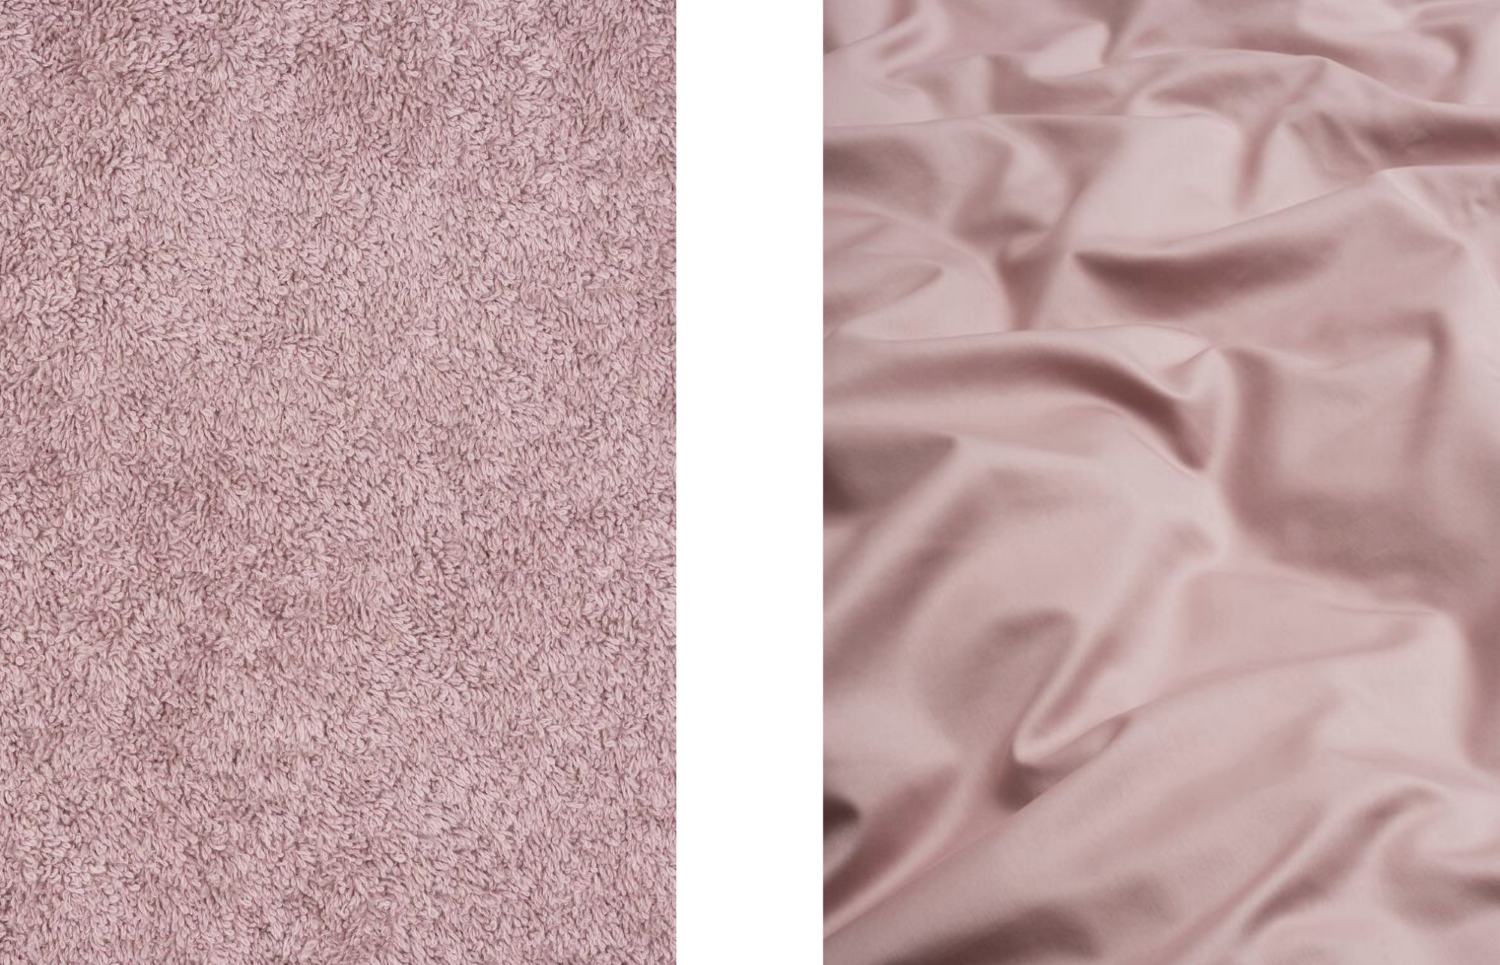 Our vintage pink Confident Hemp towel and Never Too Late bed linen feature the Pantone shade 14-1803 TPG.